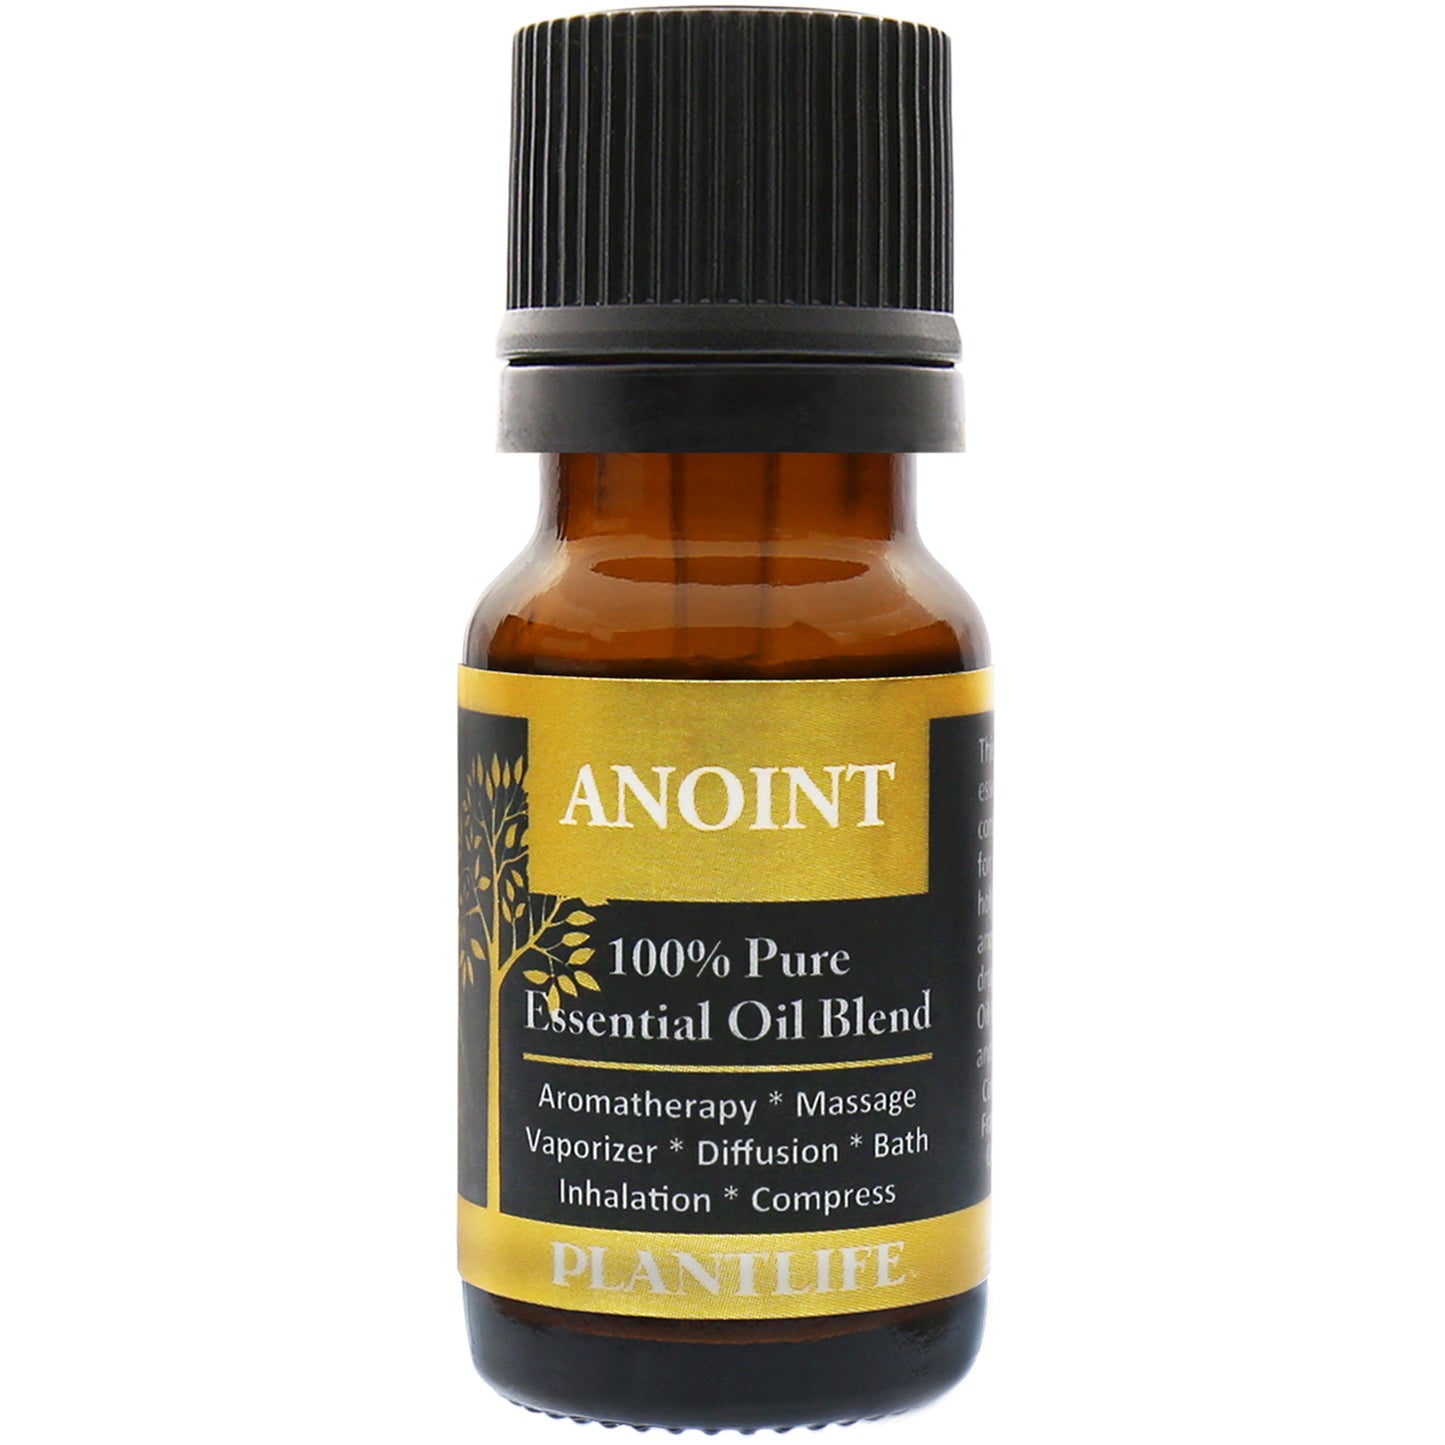 Anoint Essential Oil Blend